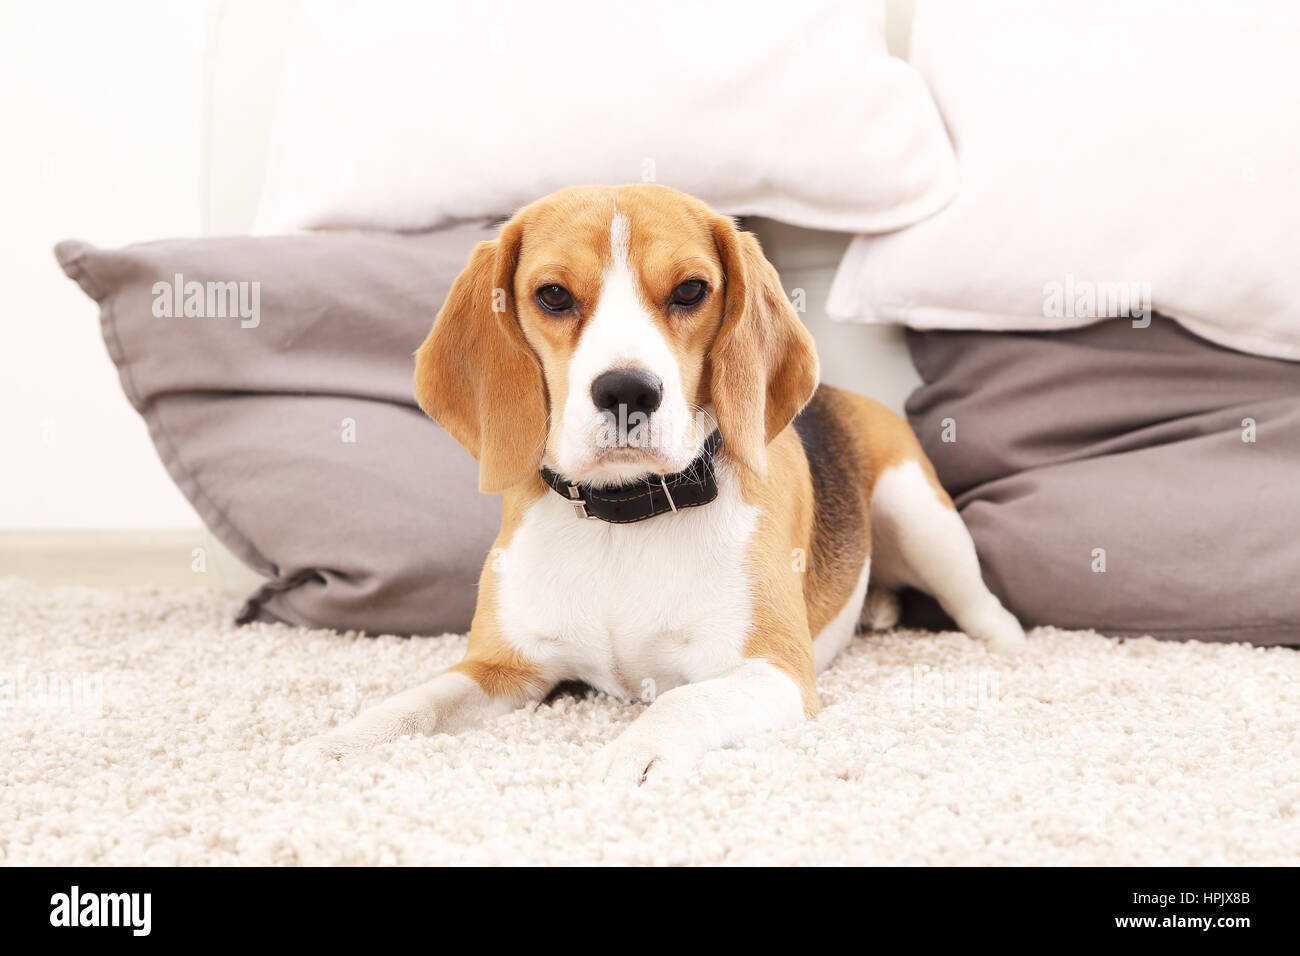 Dog on floor look at camera. Funny beagle puppy.Ttricolor beagle indoors. Stock Photo